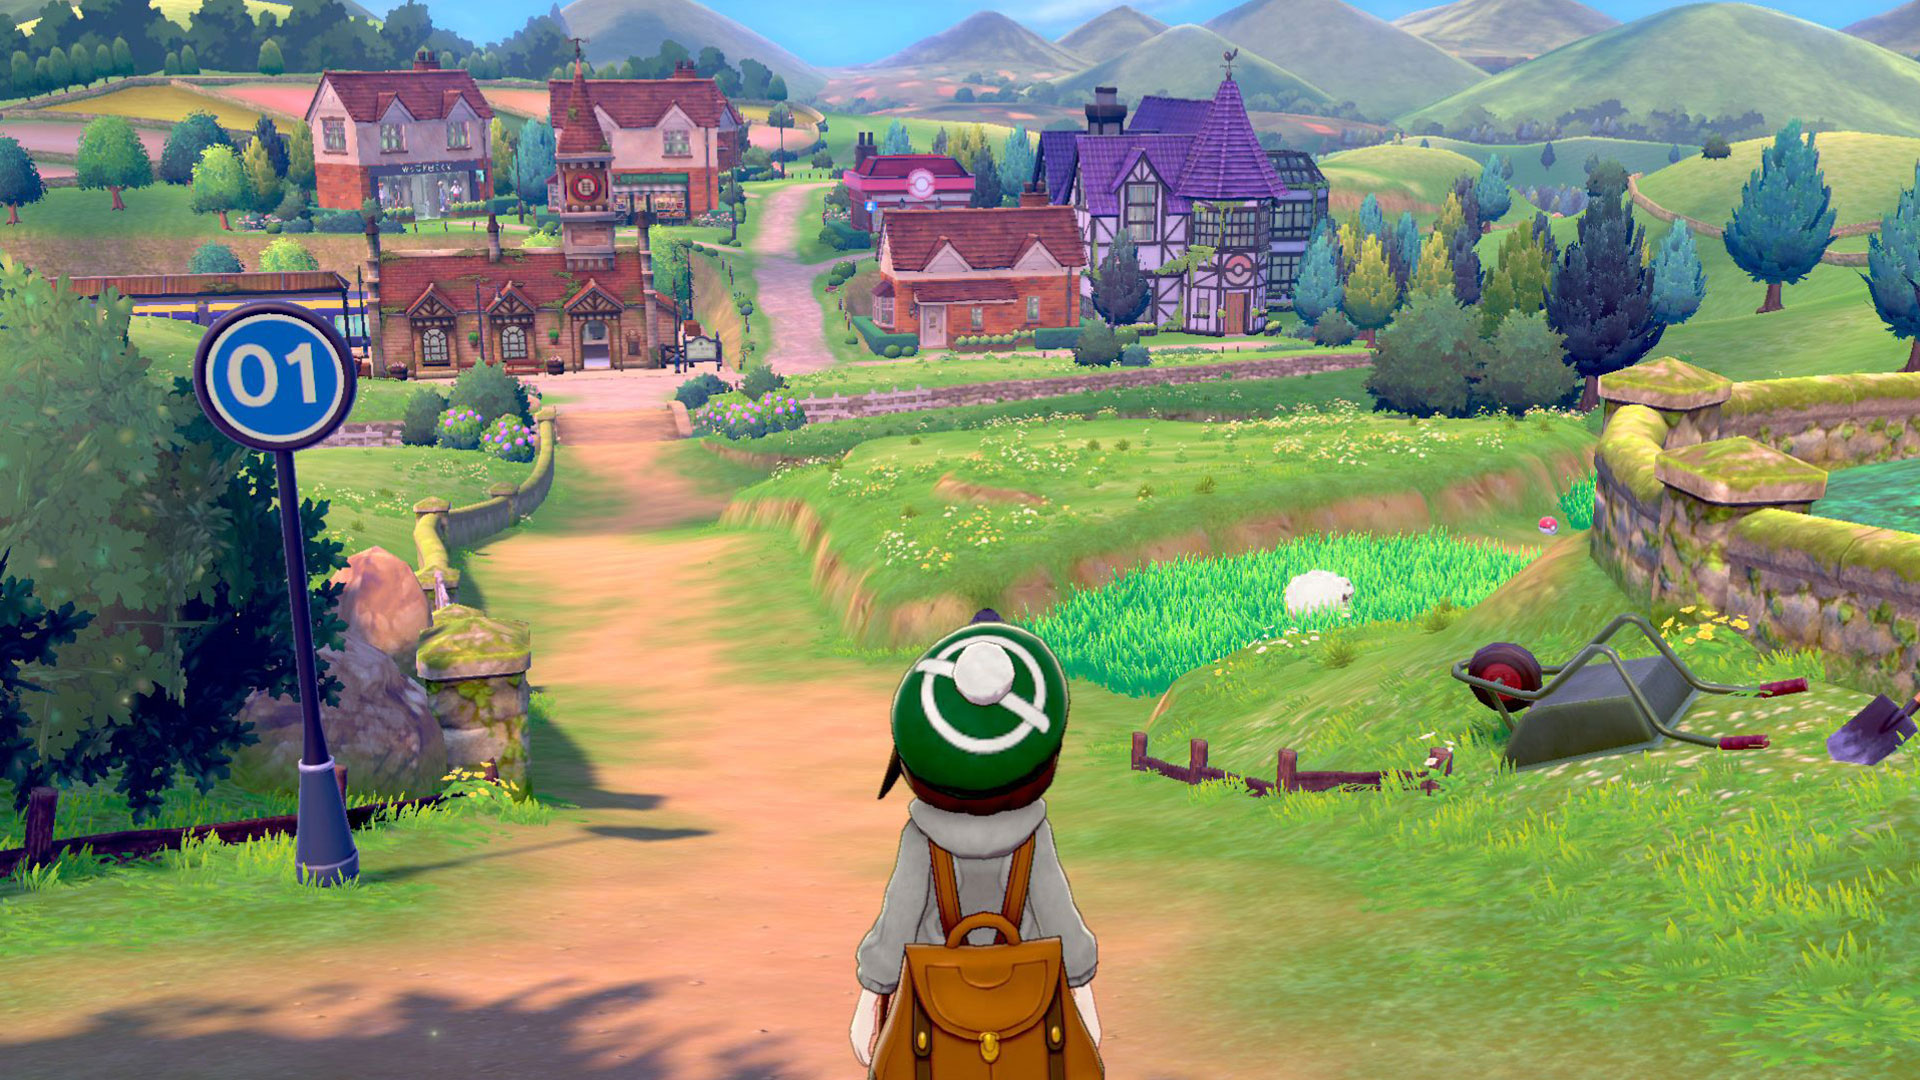 Pokémon Sword and Shield': Nintendo Switch Gameplay Feature